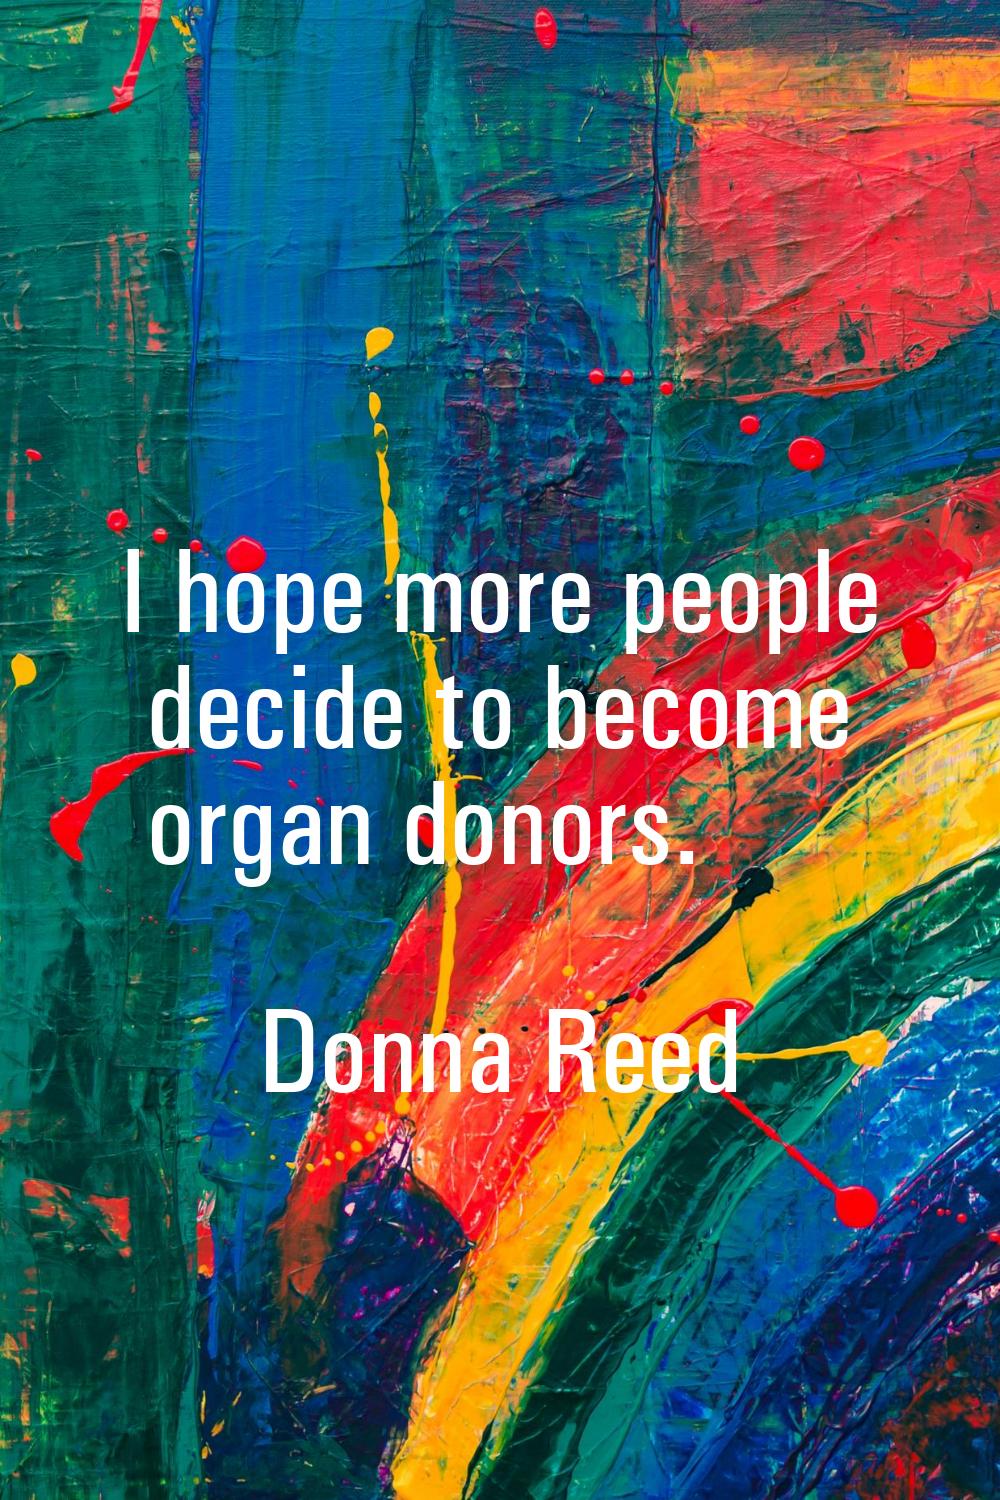 I hope more people decide to become organ donors.